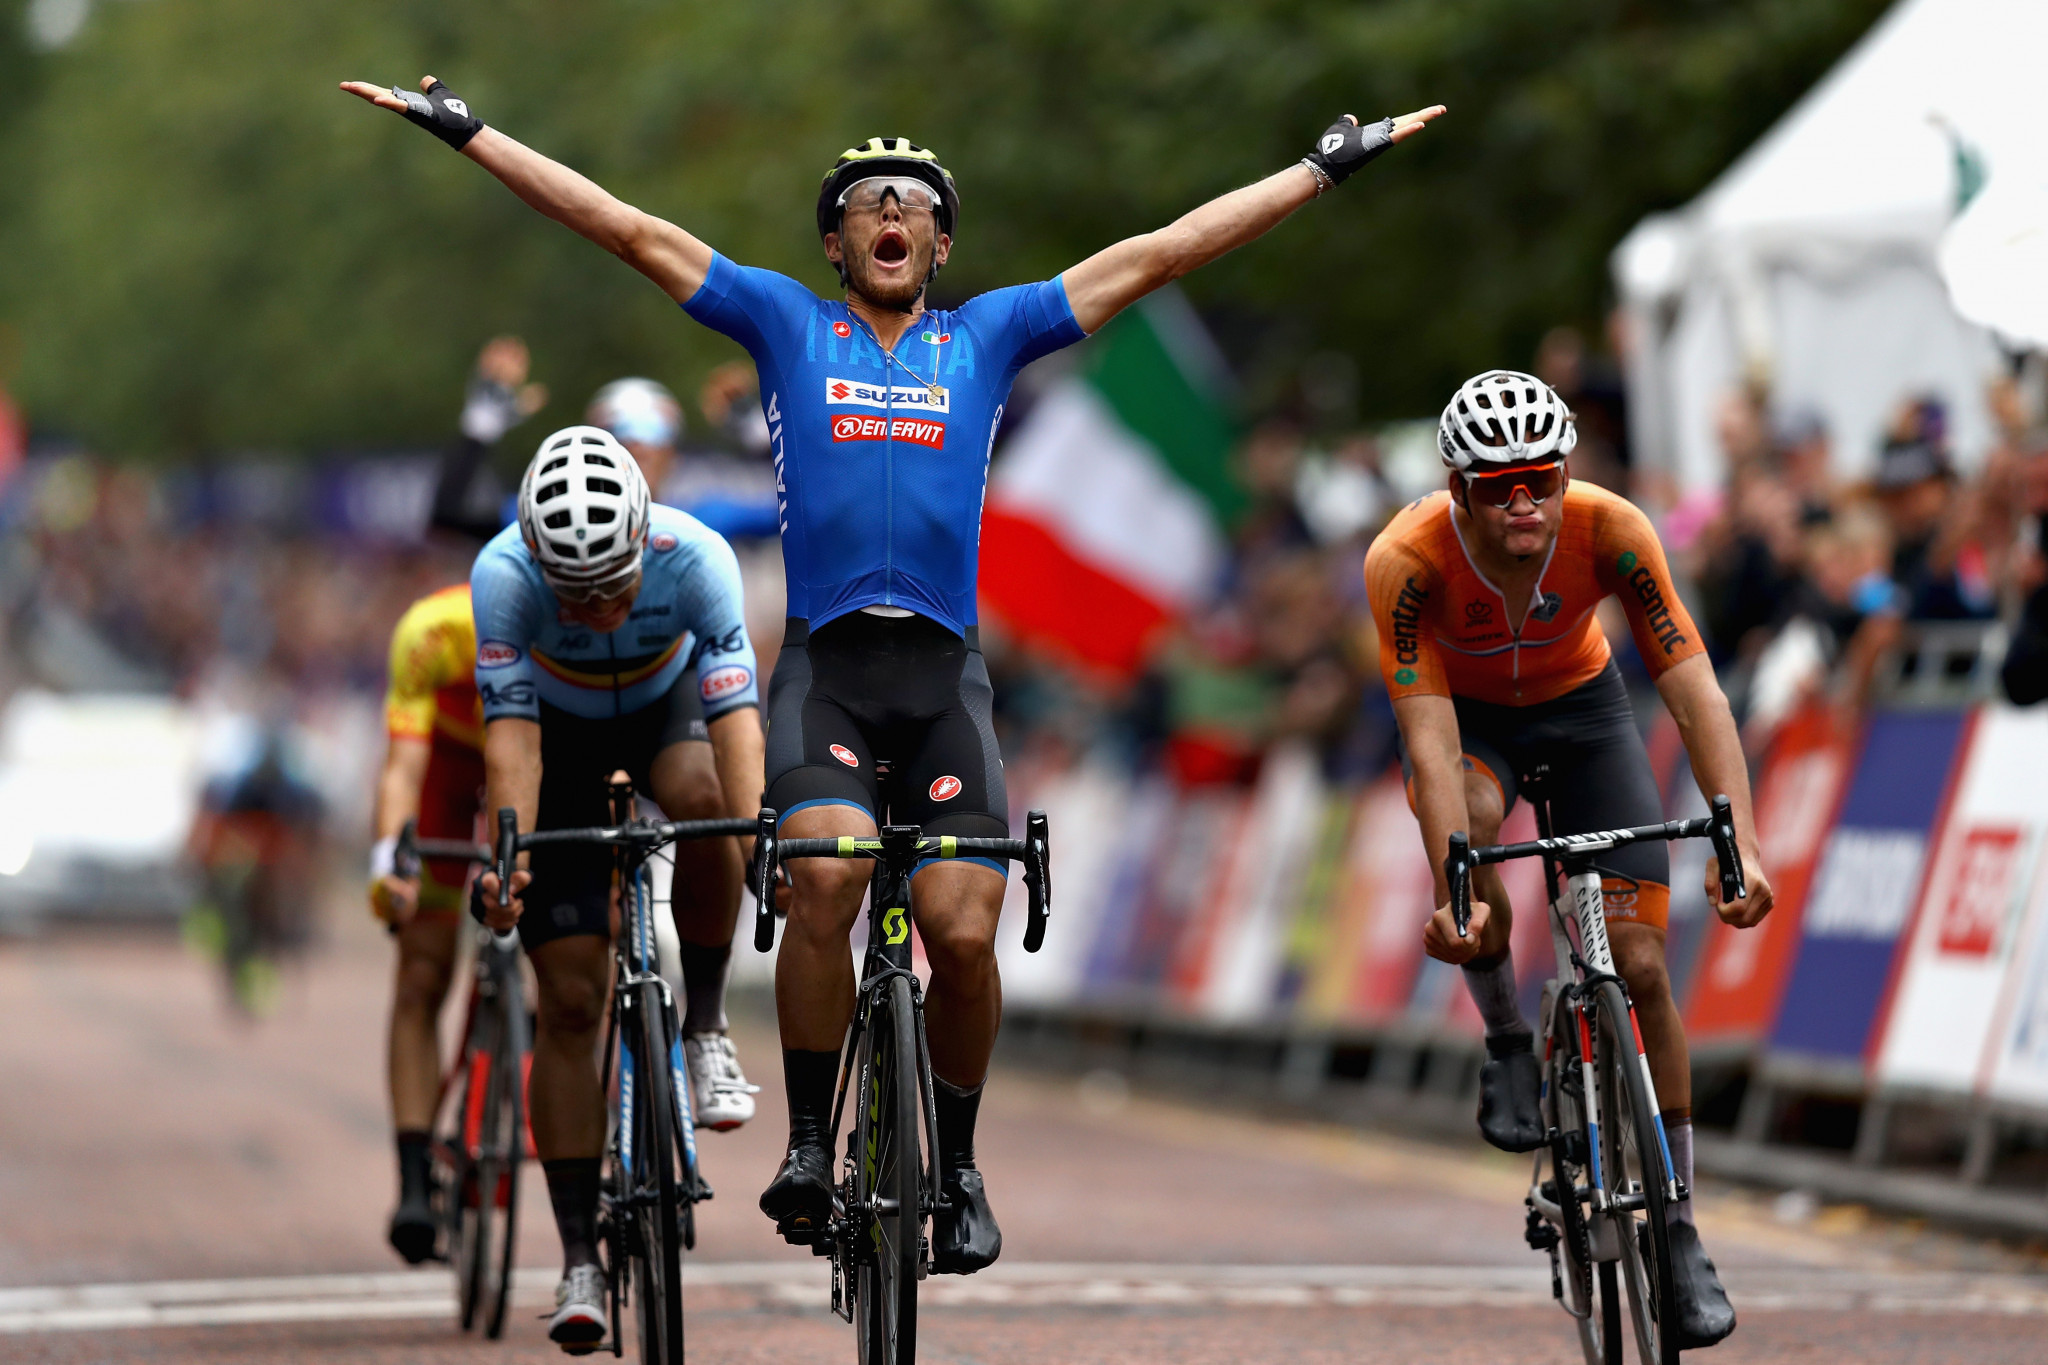 Italy won both cycling road races with Matteo Trentin taking the men's ©Getty Images